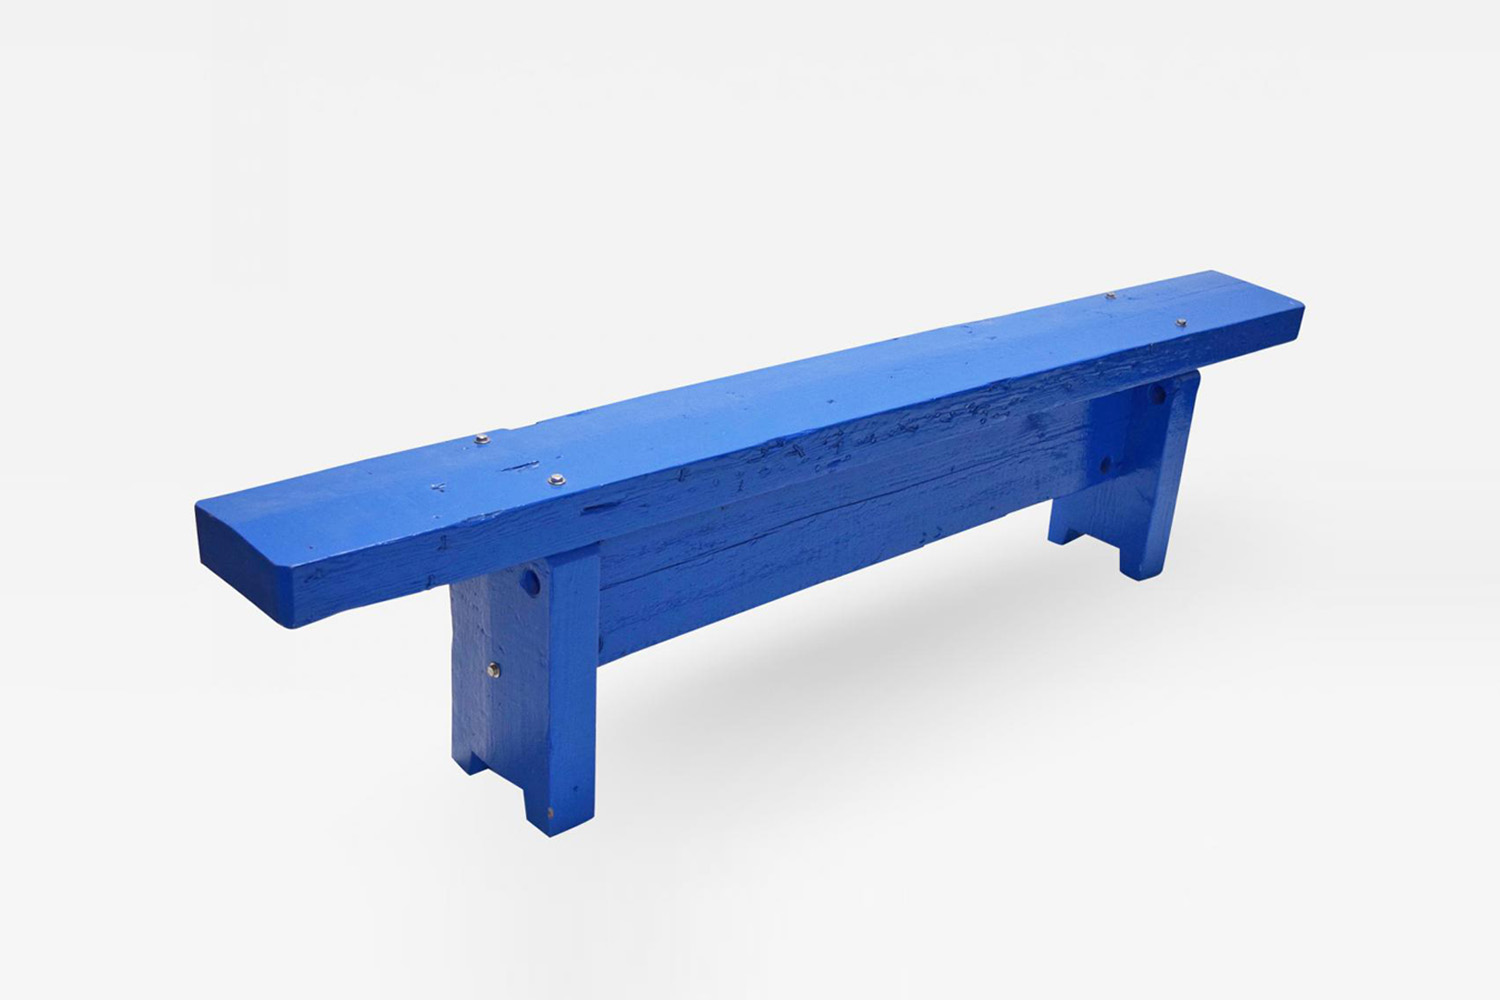 the bench at the foot of the bed is the piet hein eek one beam bench in blue; � 12